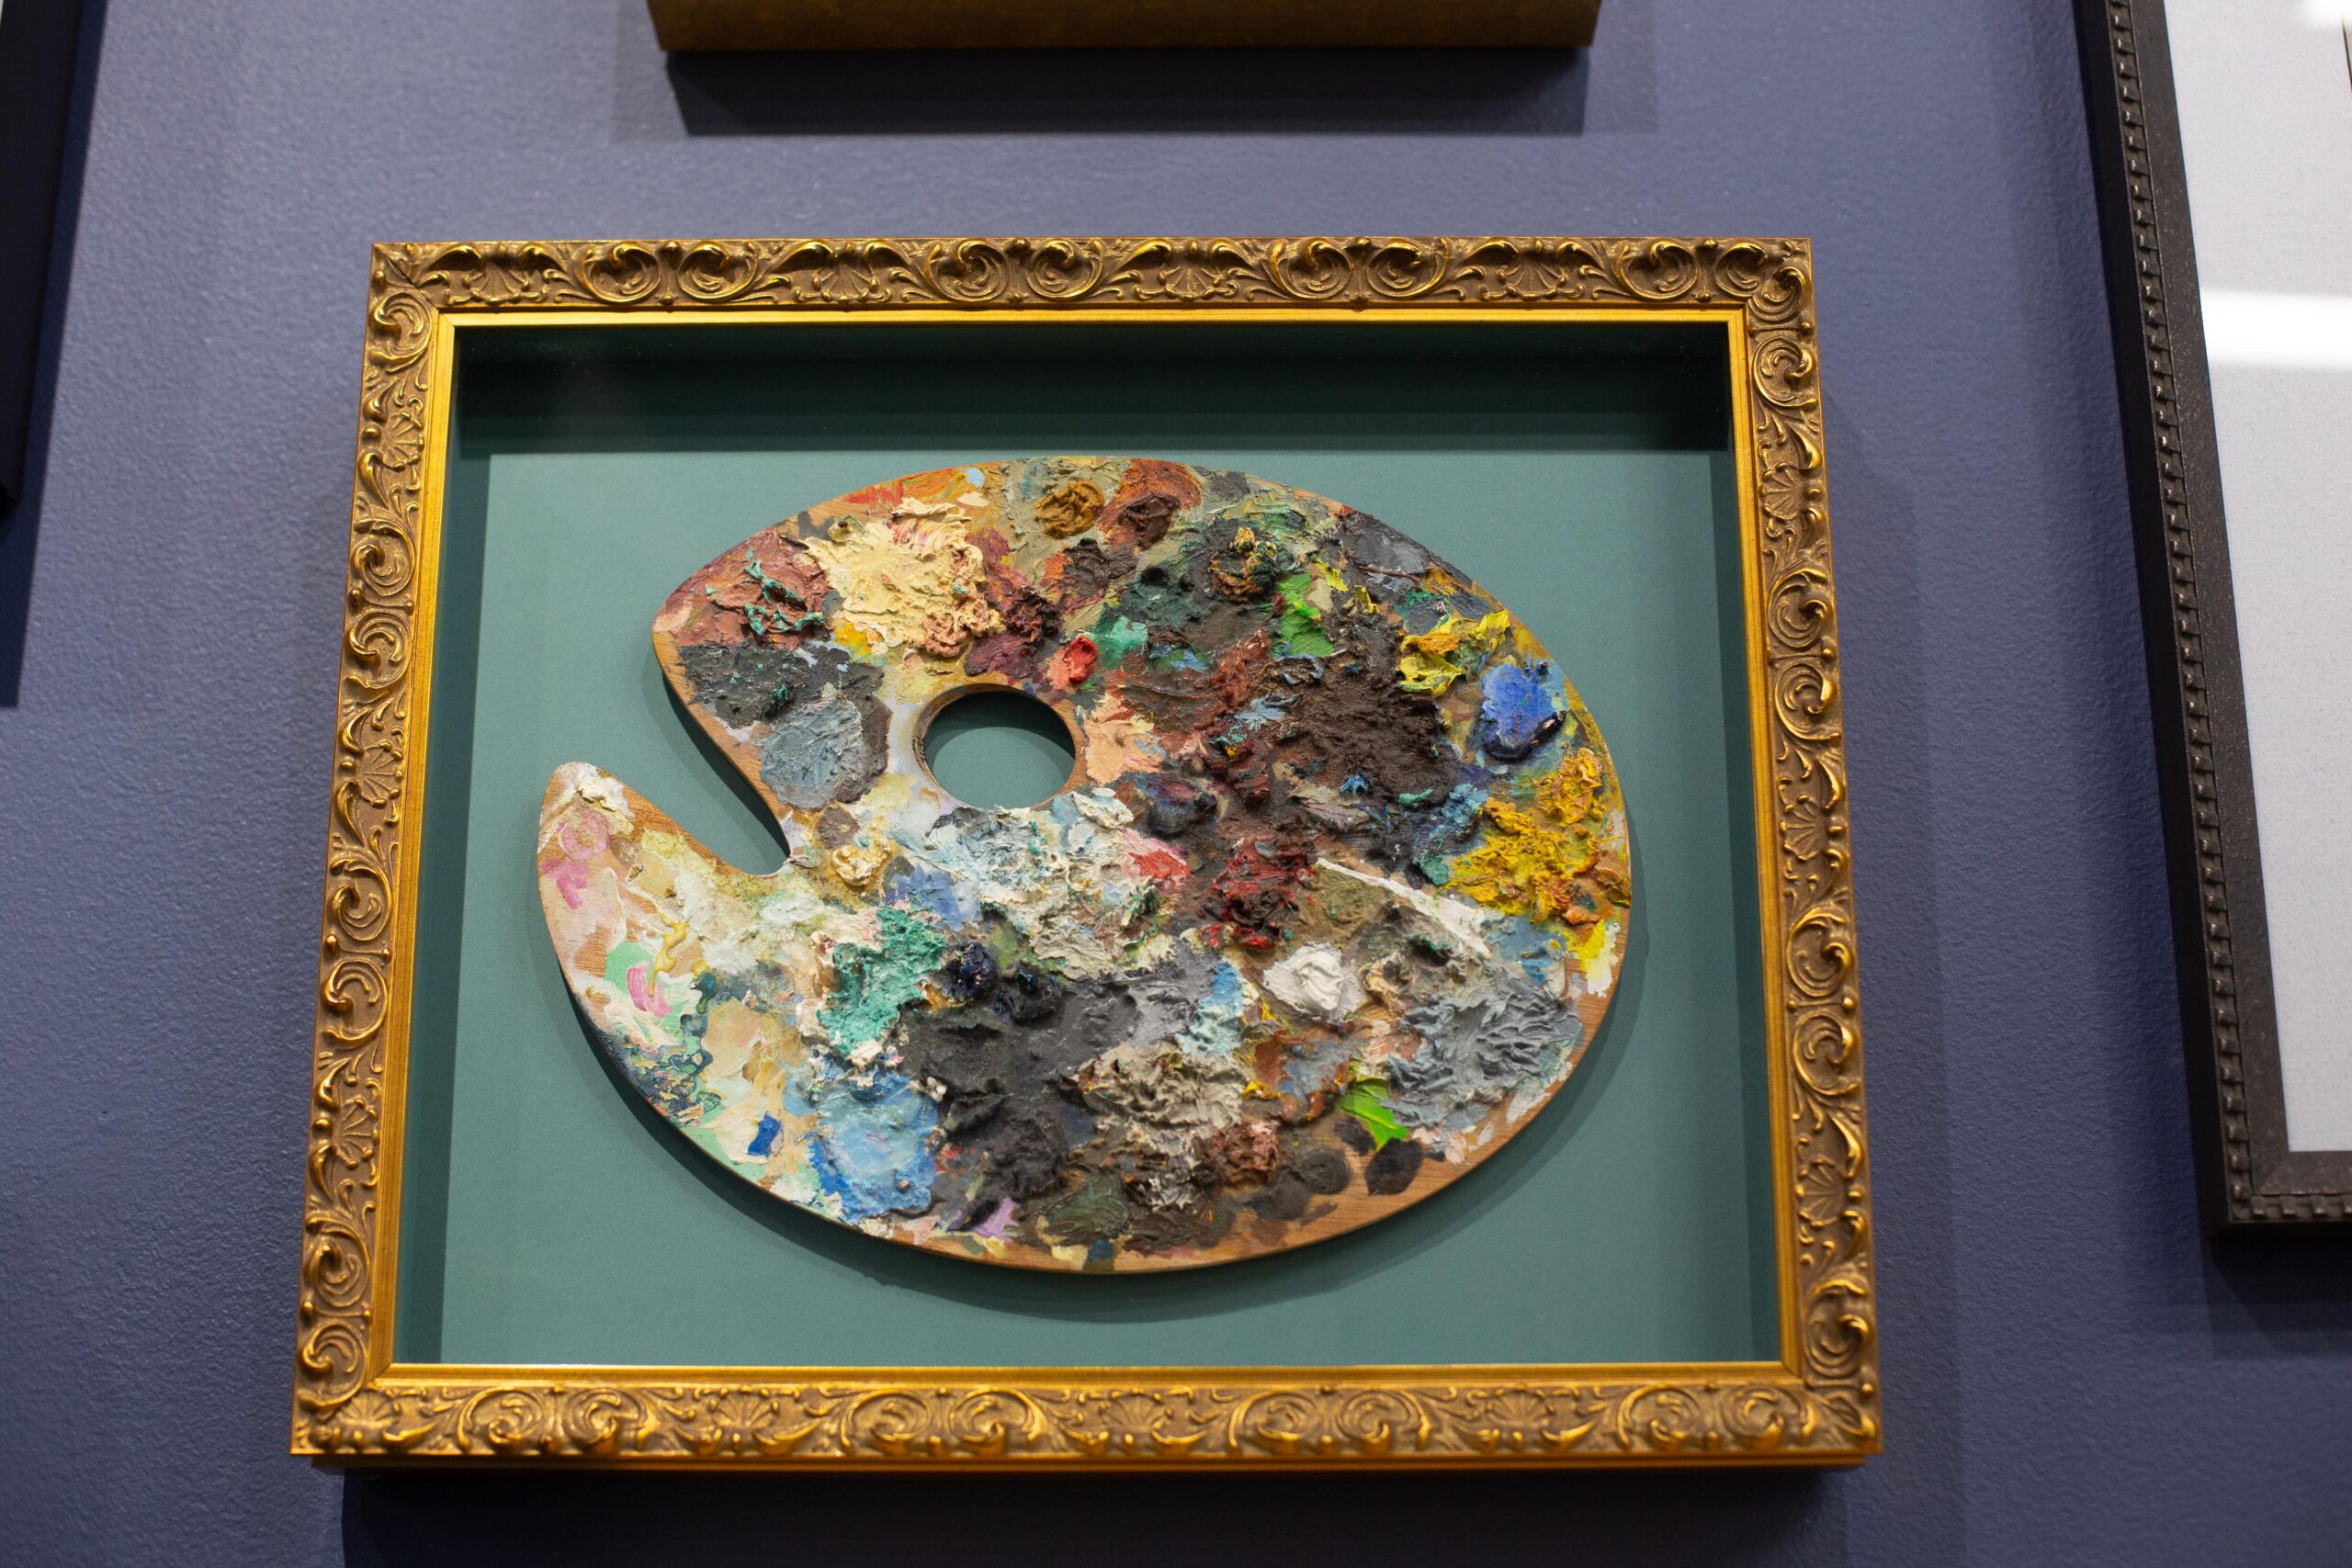 A closeup of an artist's paint palette covered in paint and framed in an elegant gold frame. The painting hangs from a blue gallery wall.